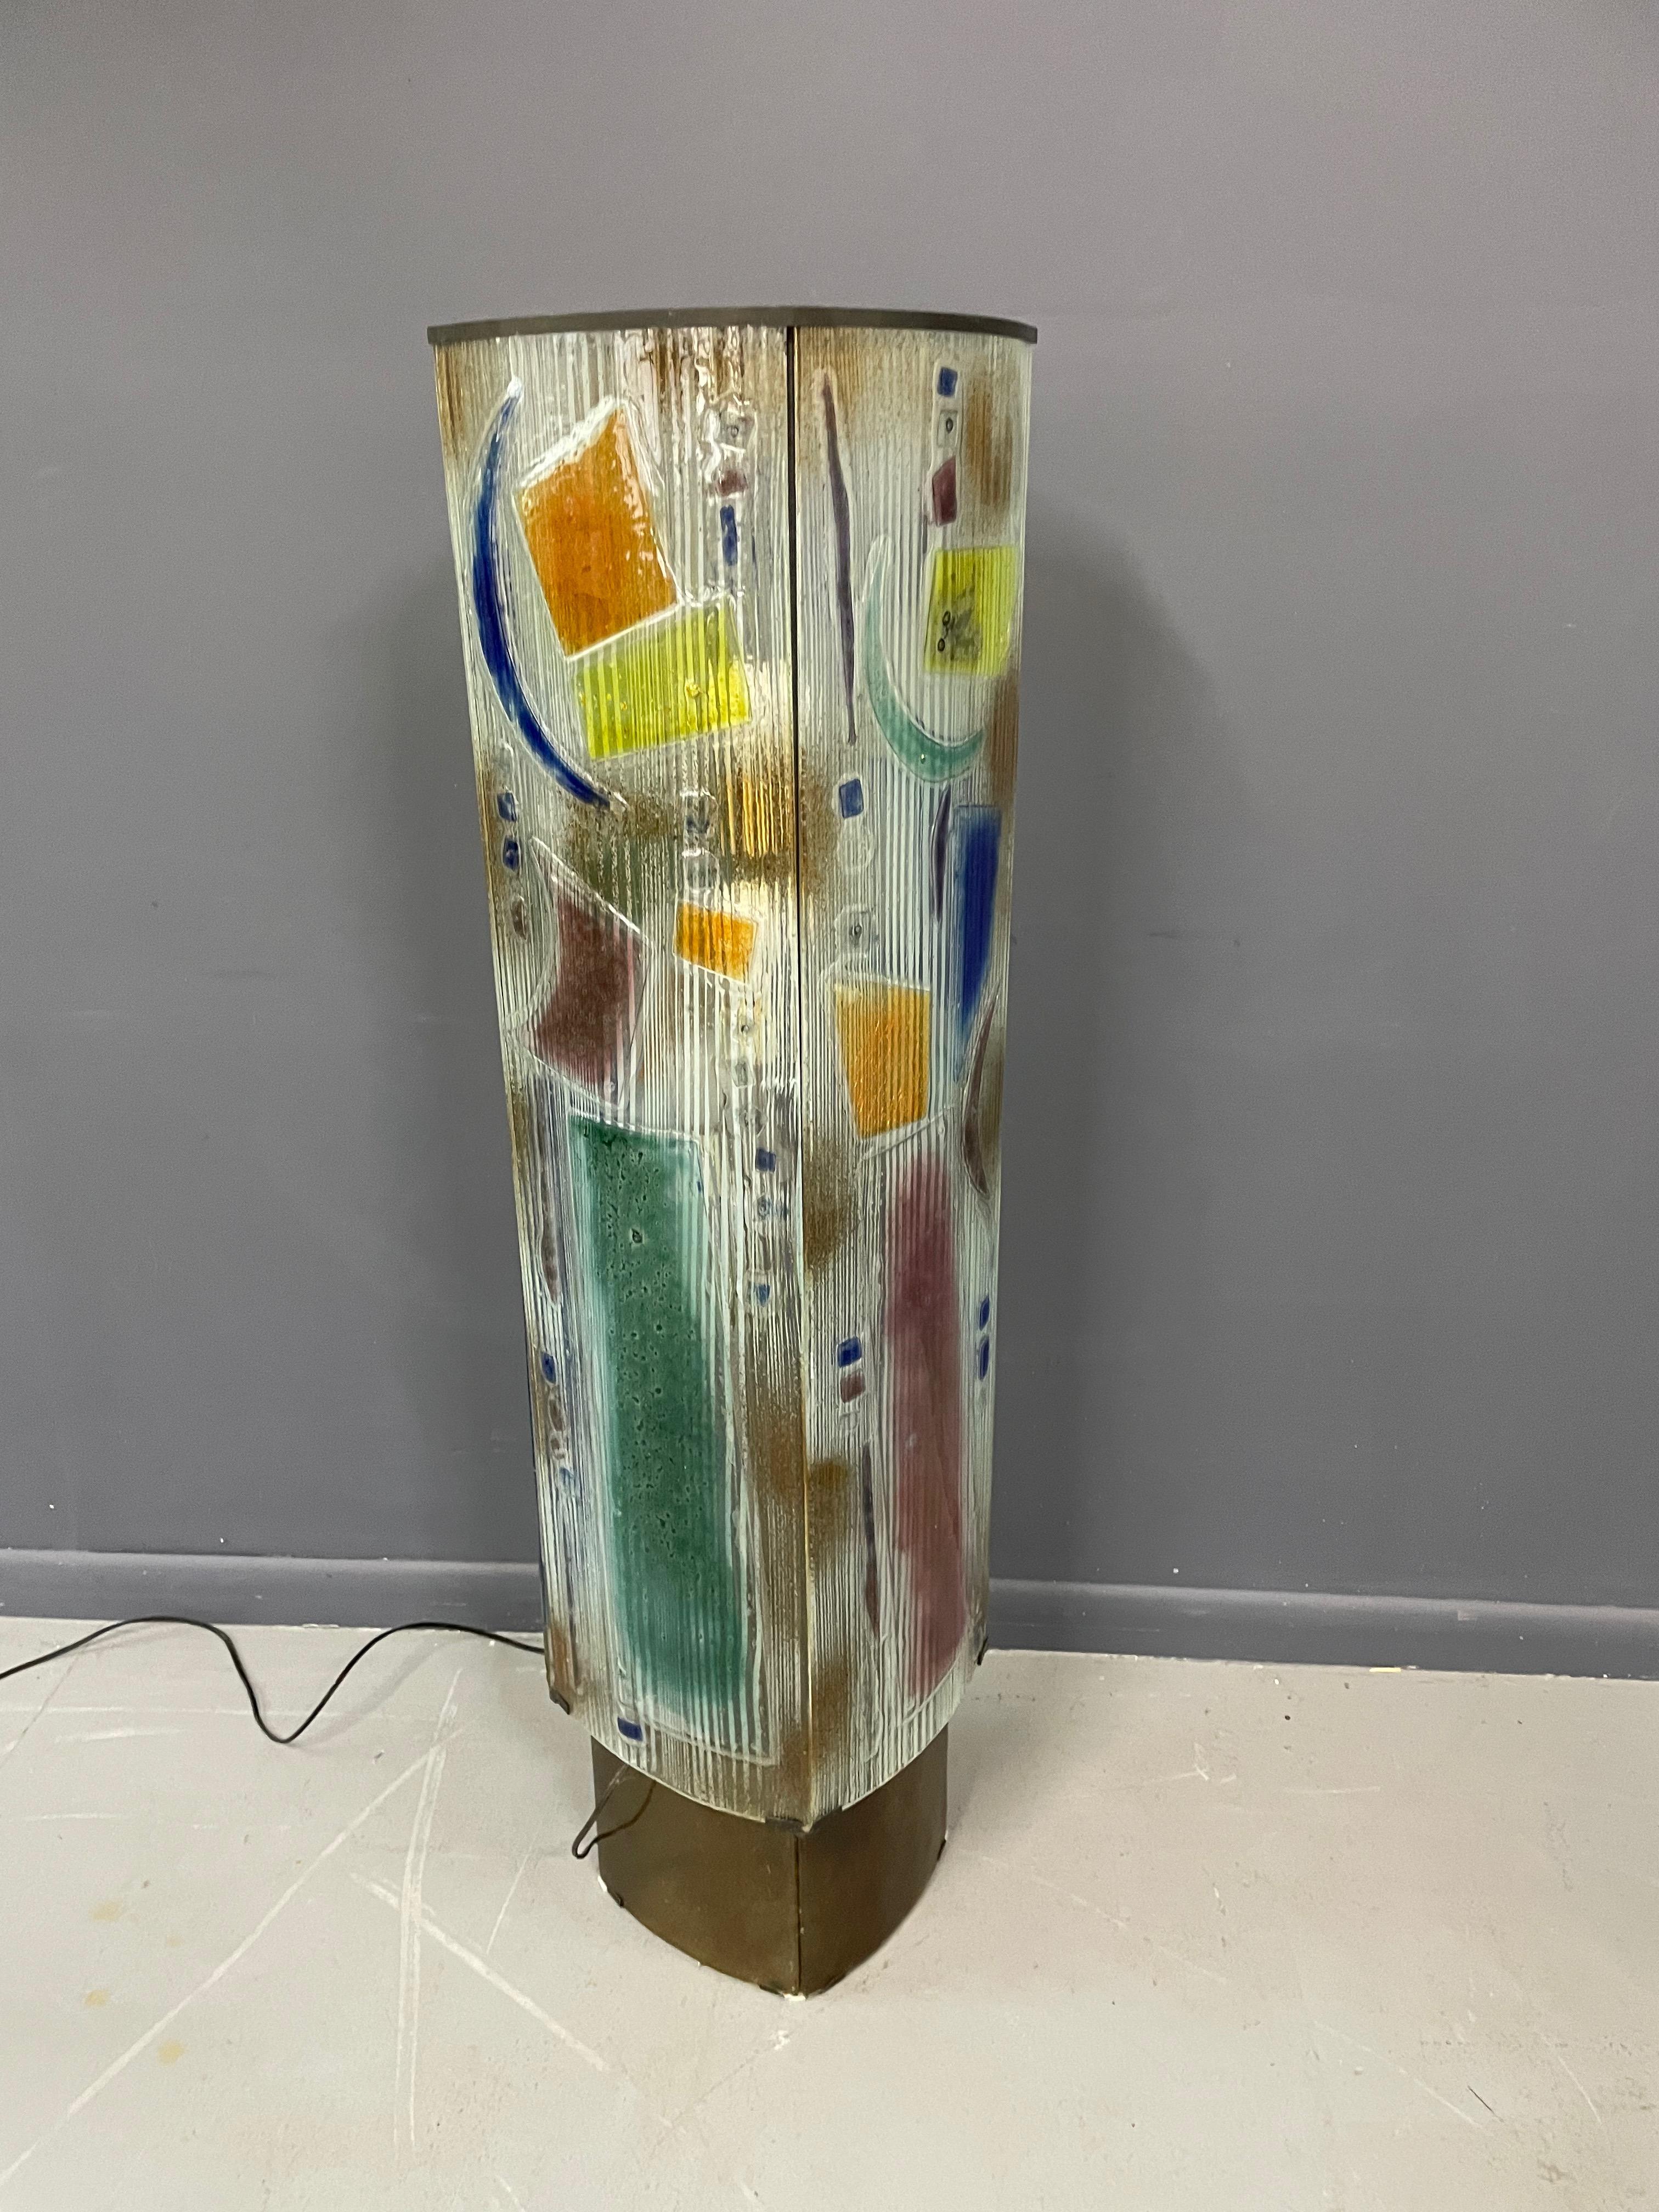 Wonderful floor lamp with four separate hand produced colorful panels with complimentary designs.